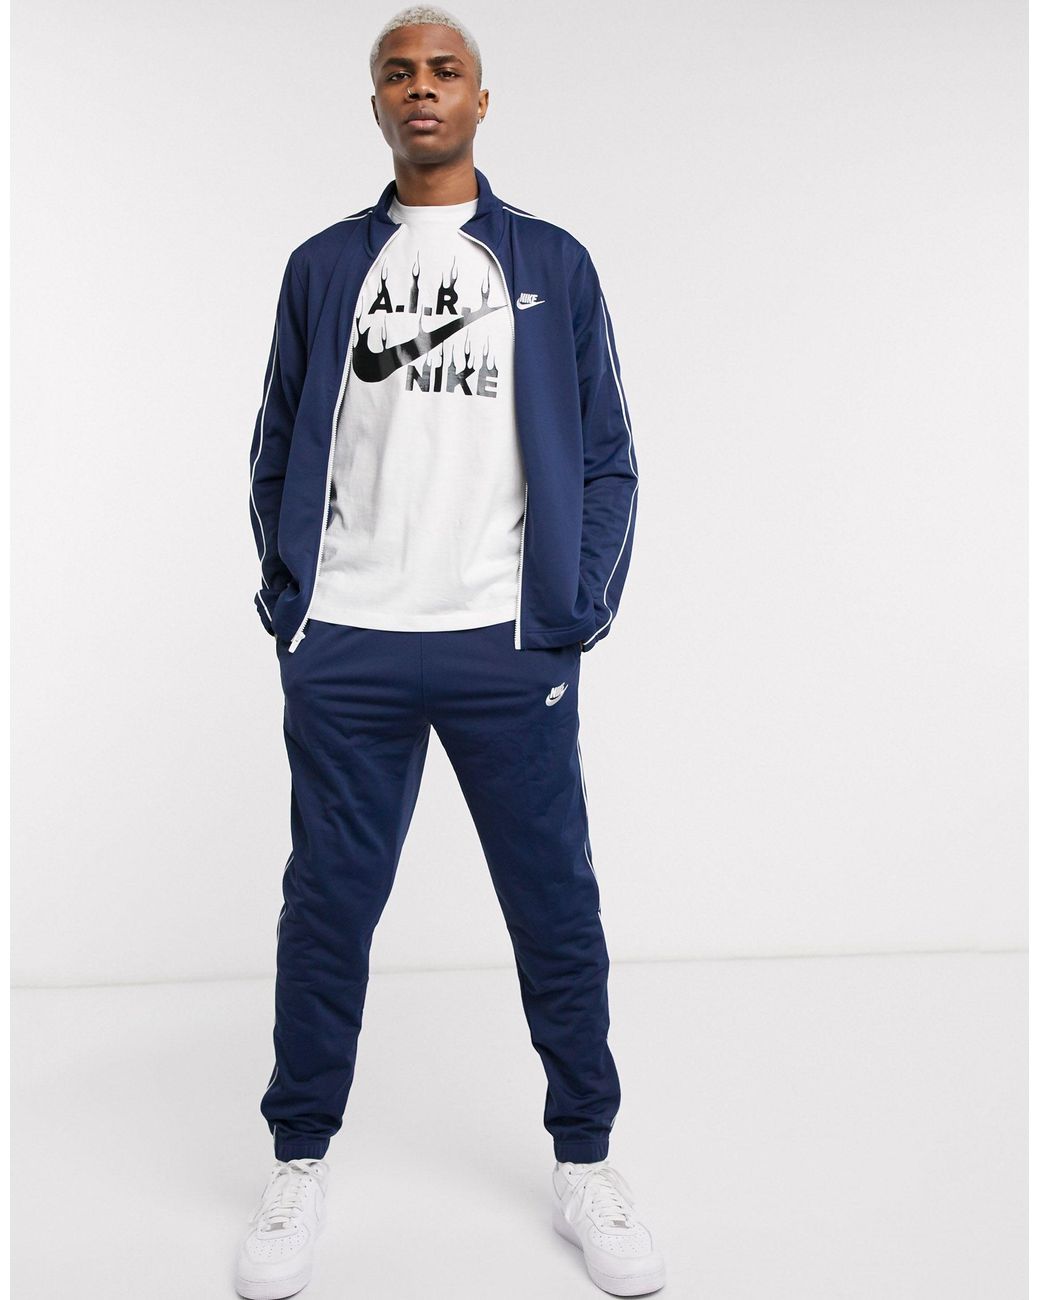 Nike Synthetic Tracksuit in Navy (Blue) for Men - Save 44% - Lyst